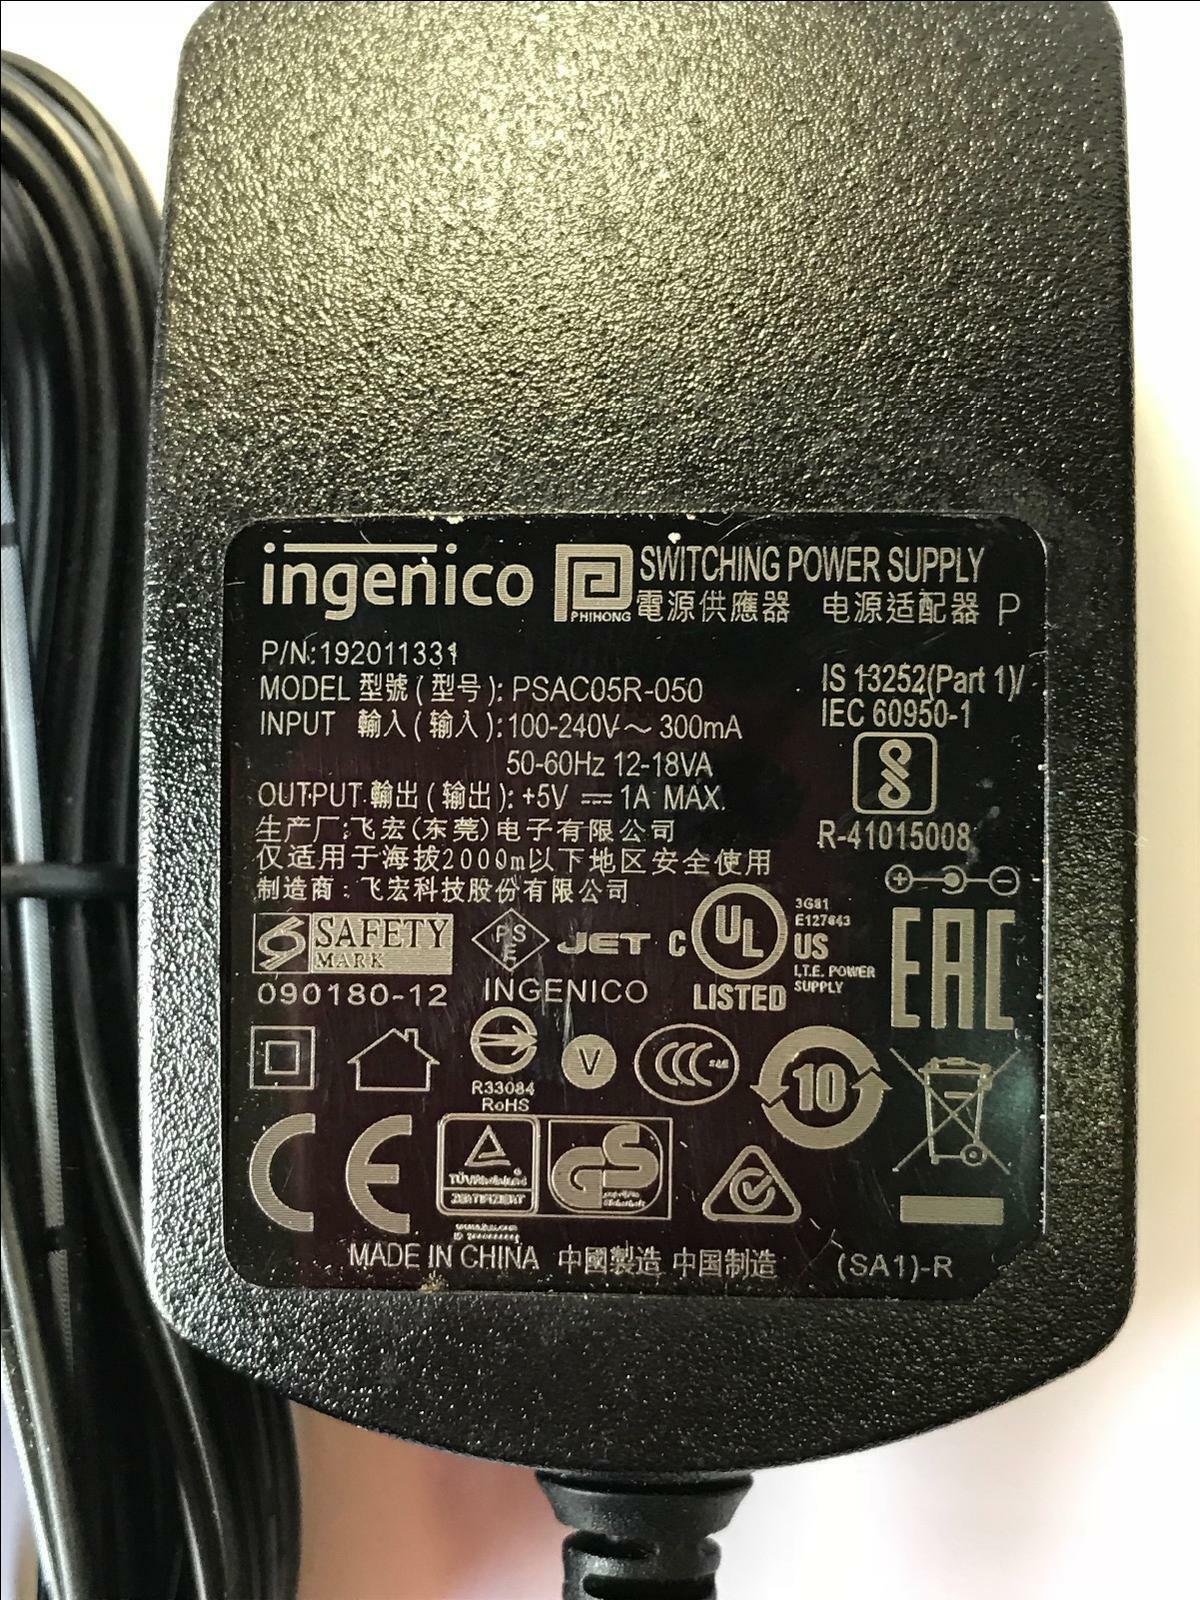 New 5V 1A Ingenico 192011352 PSAC05R-050 Switching Power Supply ac adapter - Click Image to Close